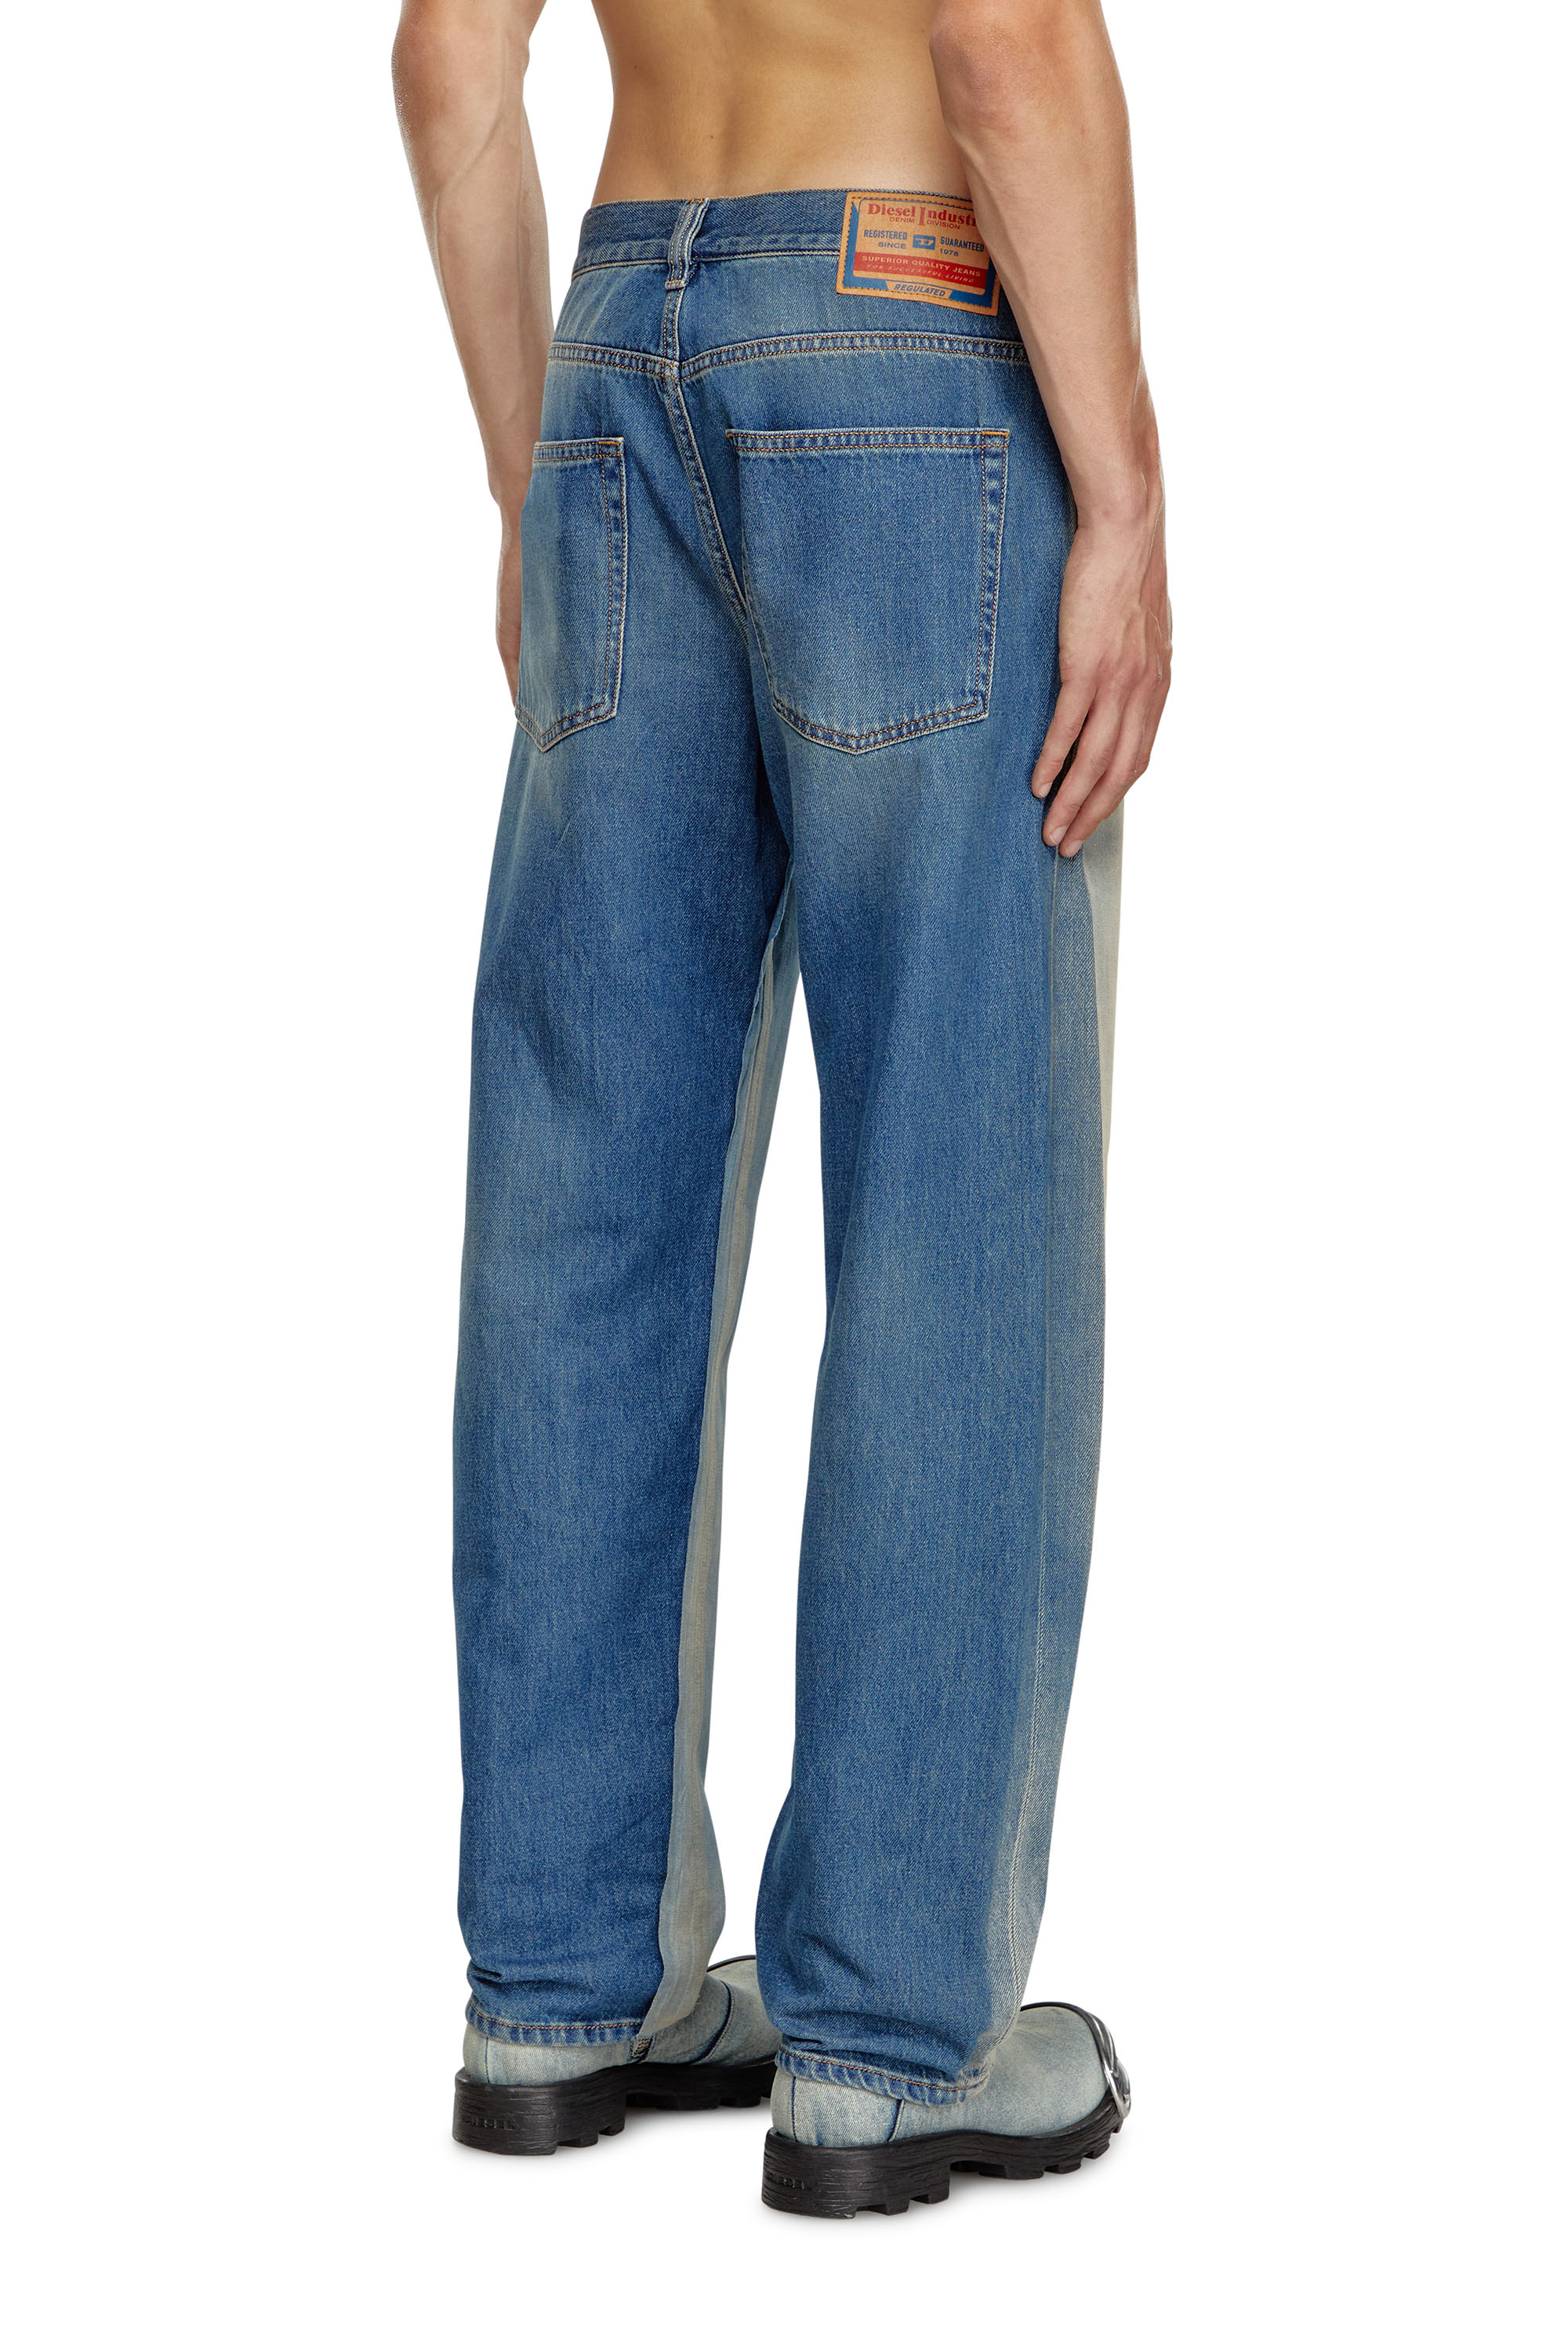 Diesel - Straight Jeans 2010 D-Macs 09K22, Hombre Straight Jeans - 2010 D-Macs in Azul marino - Image 4